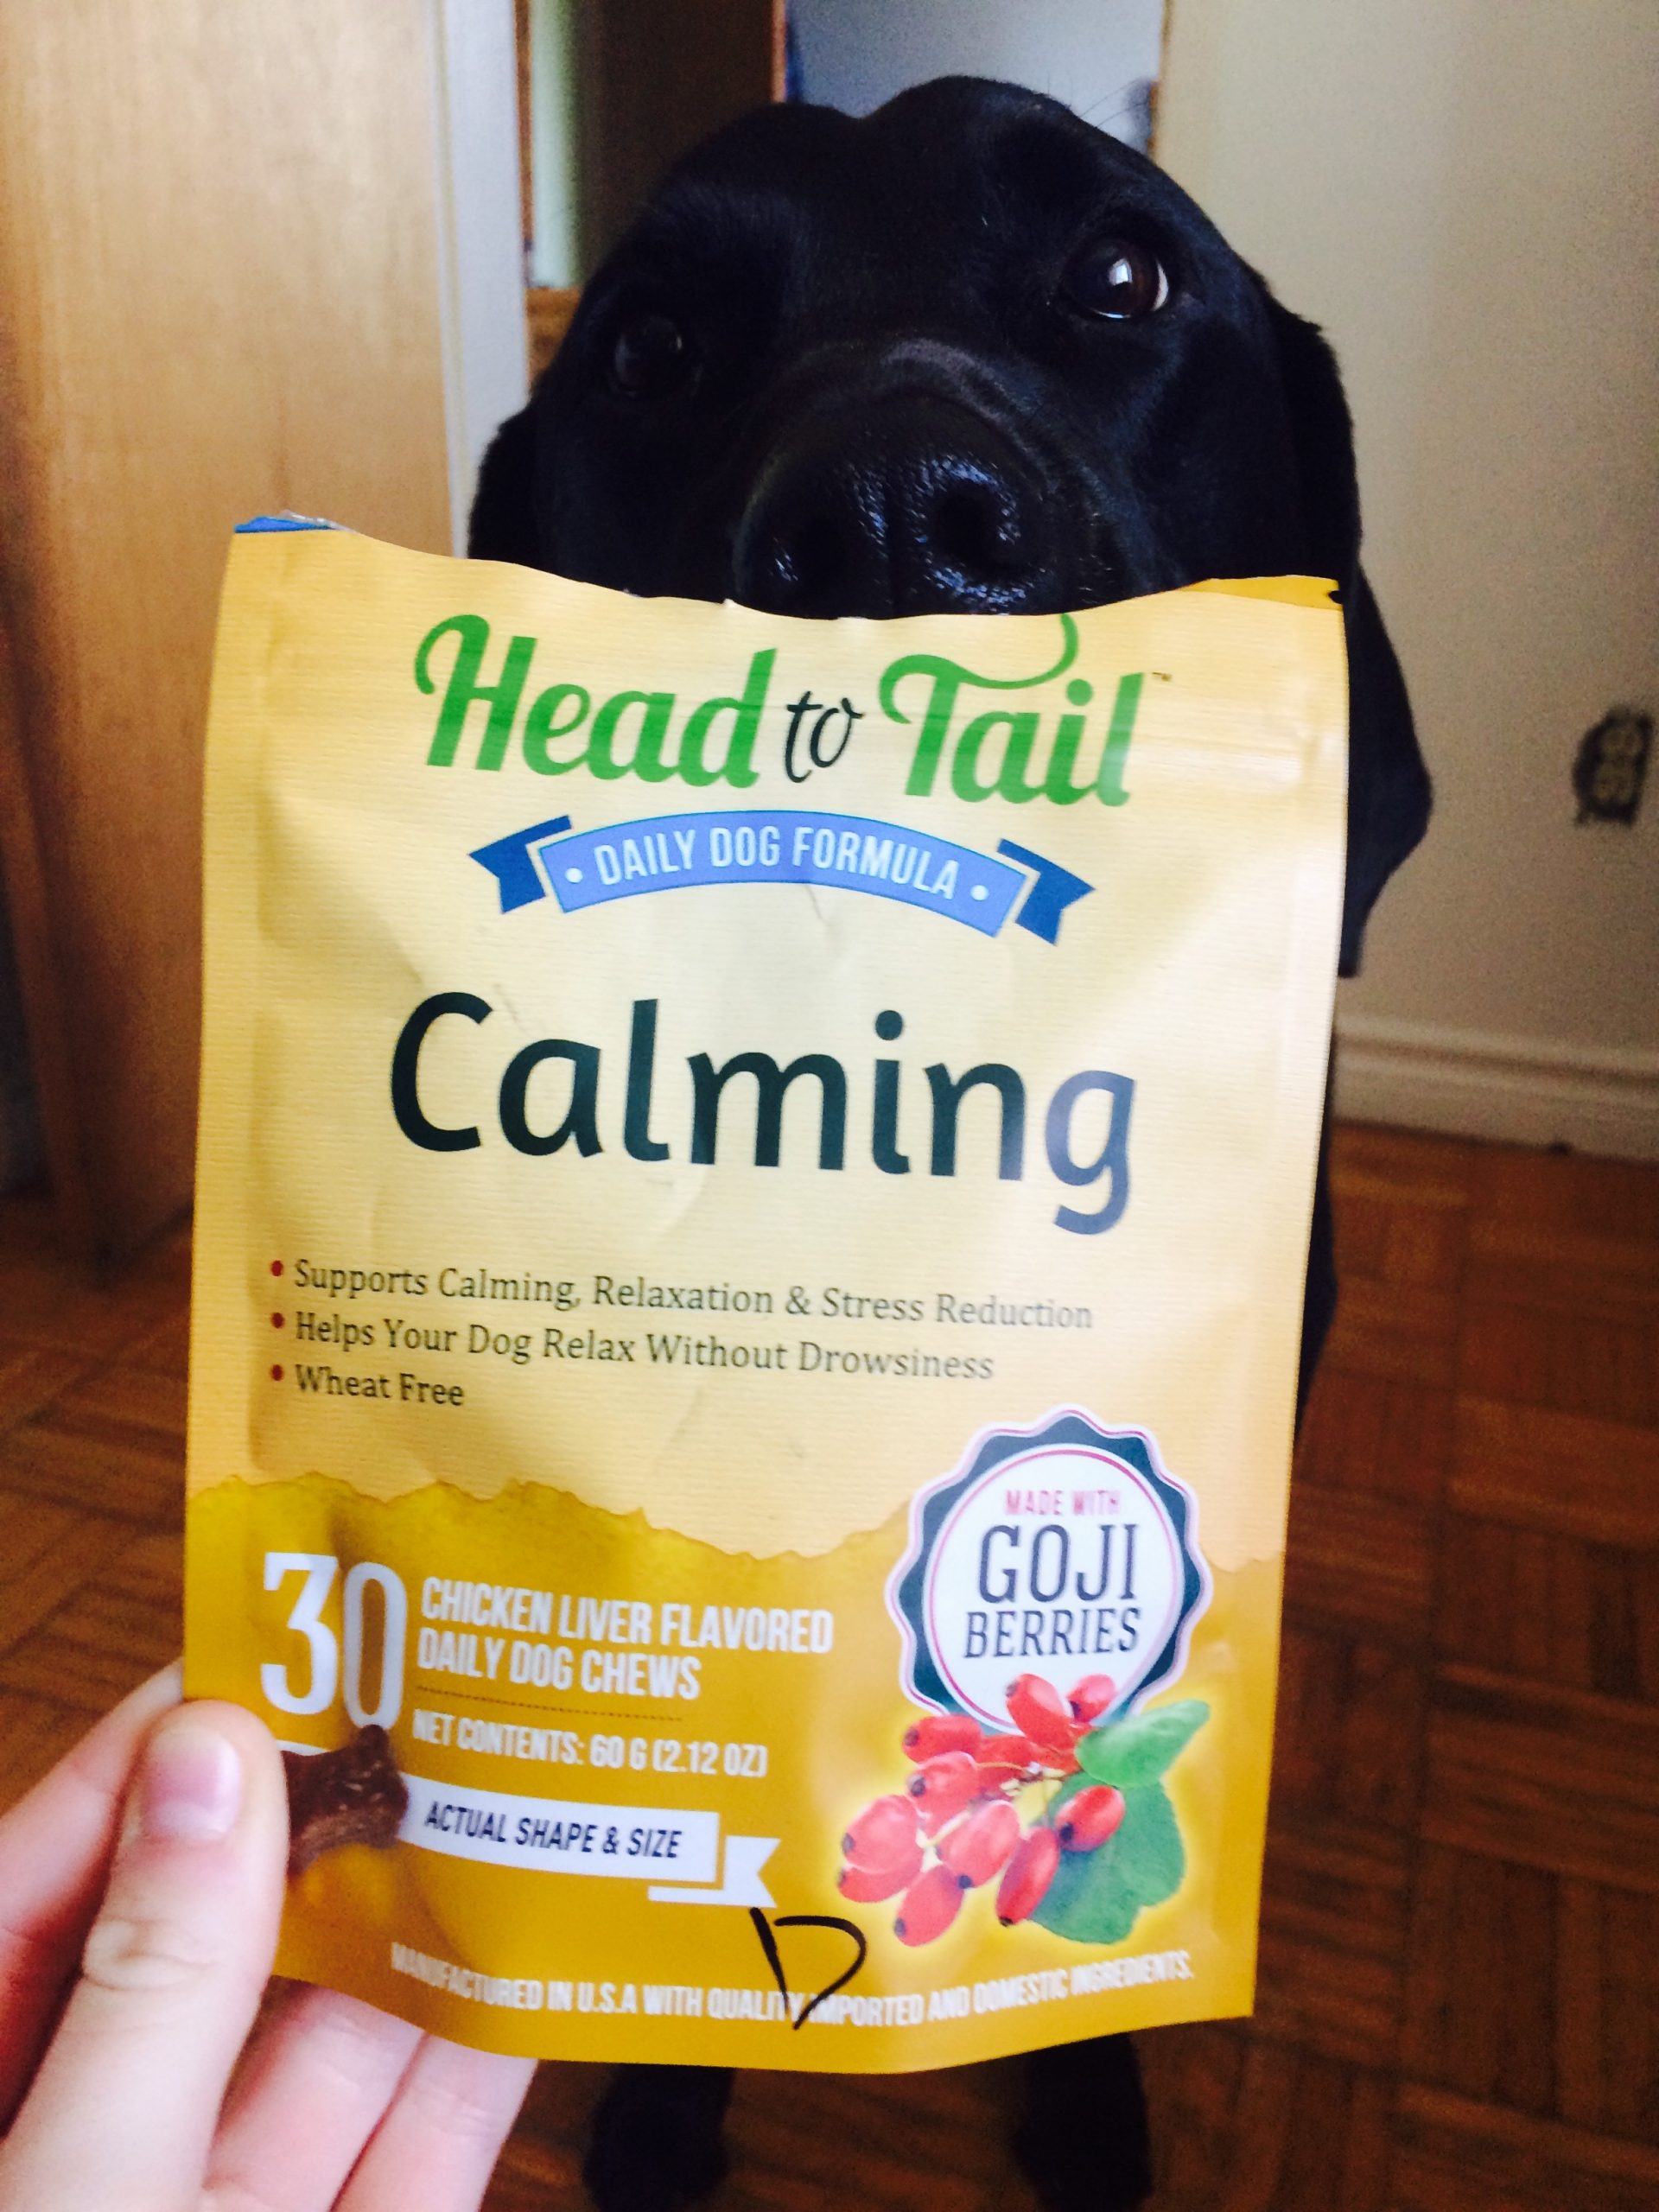 Head to tail calming reviews in Misc